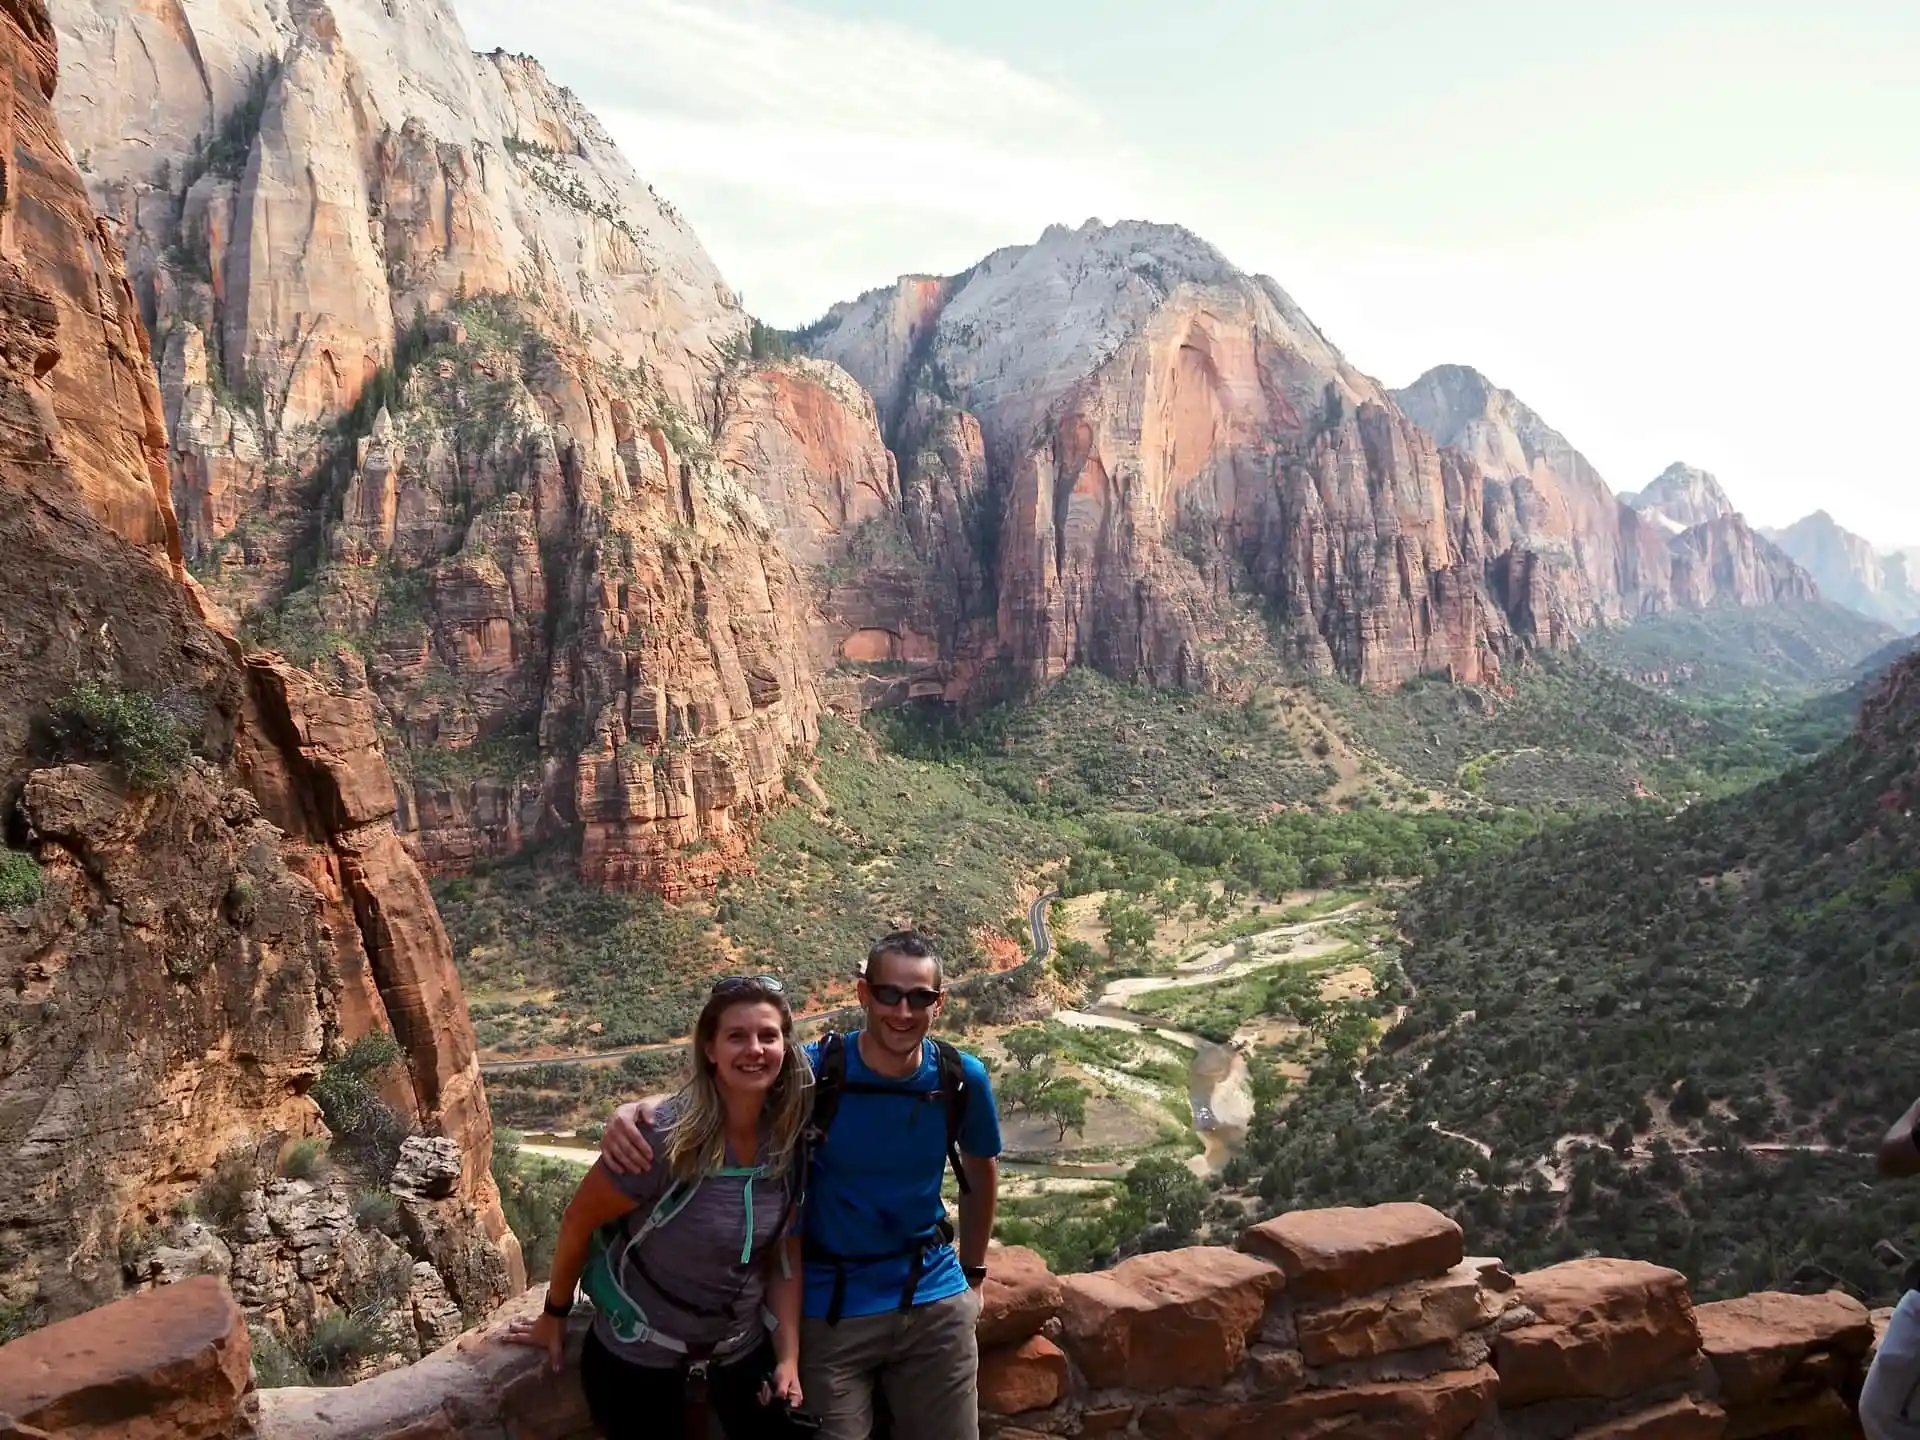 The breathtaking views of Zion canyon start early on this hike